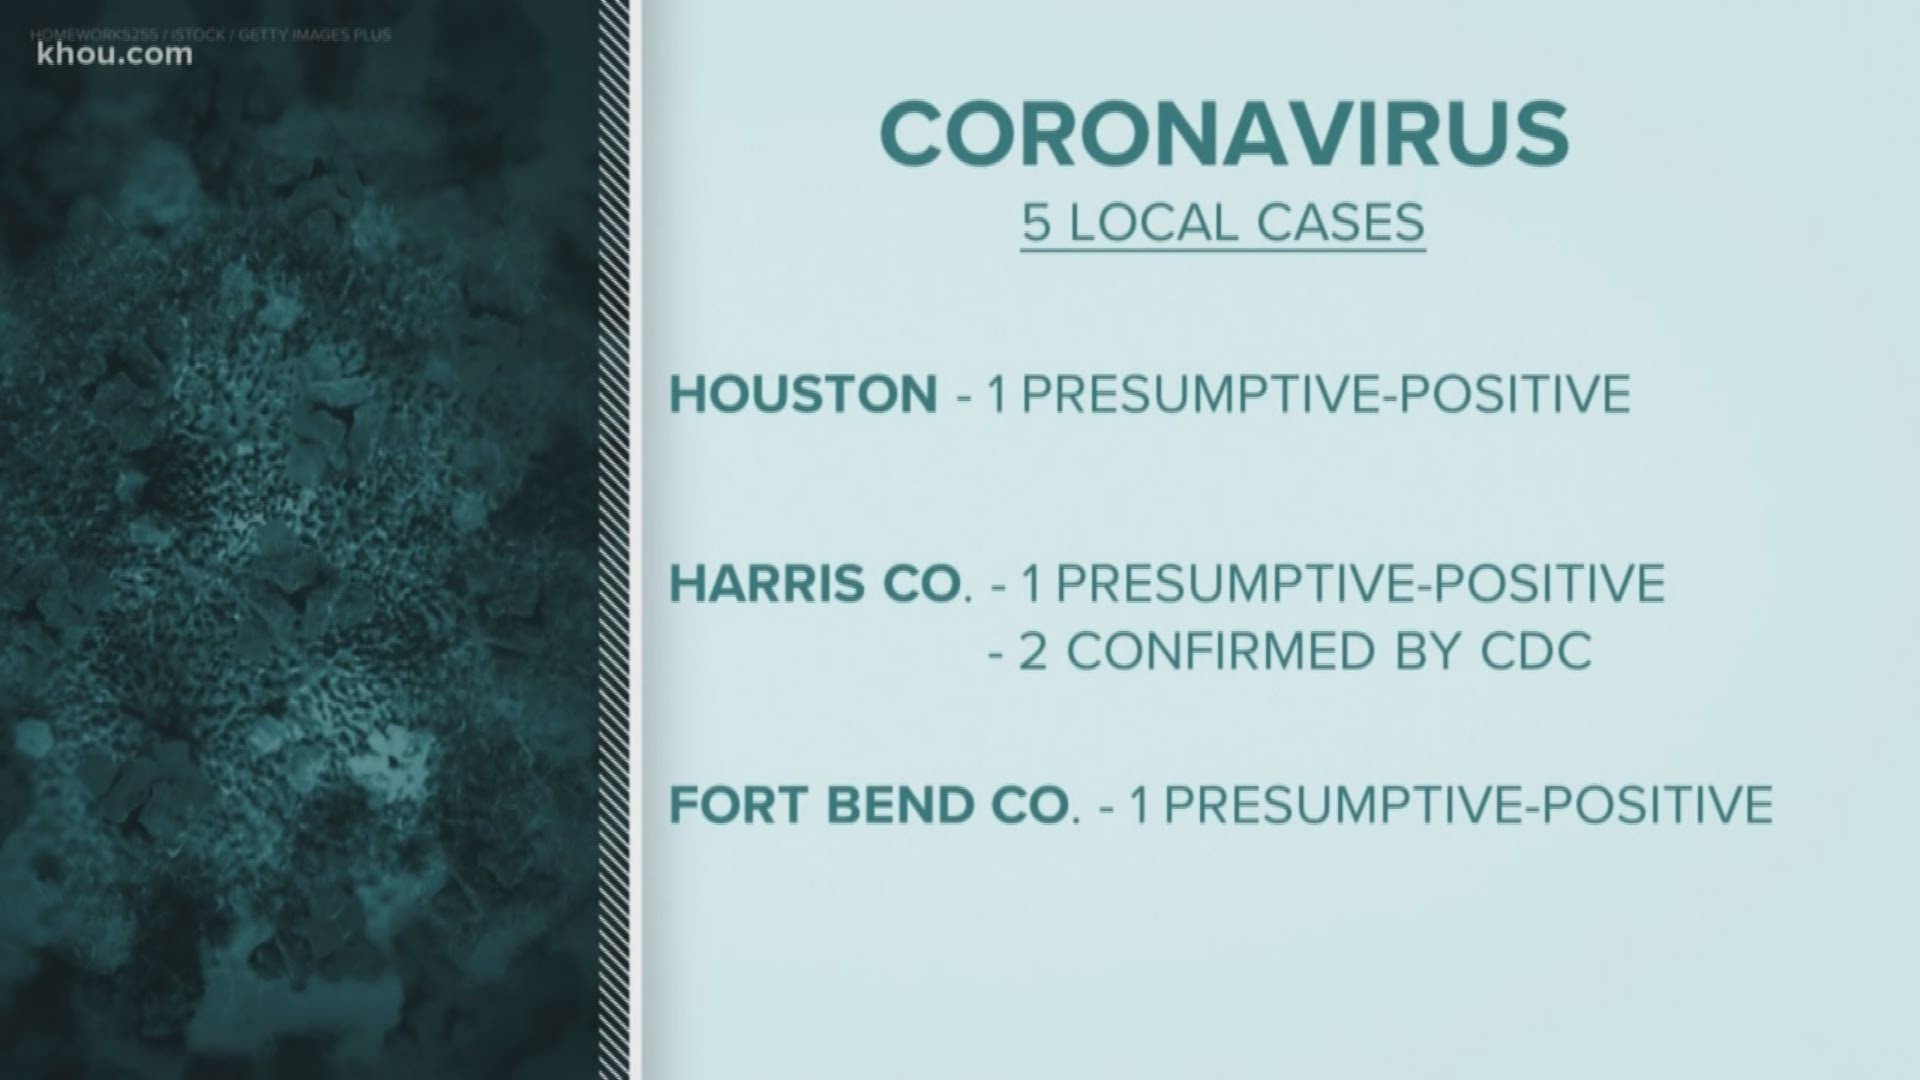 Five patients who are being treated for the coronavirus in the Houston area all traveled together to Egypt last month.